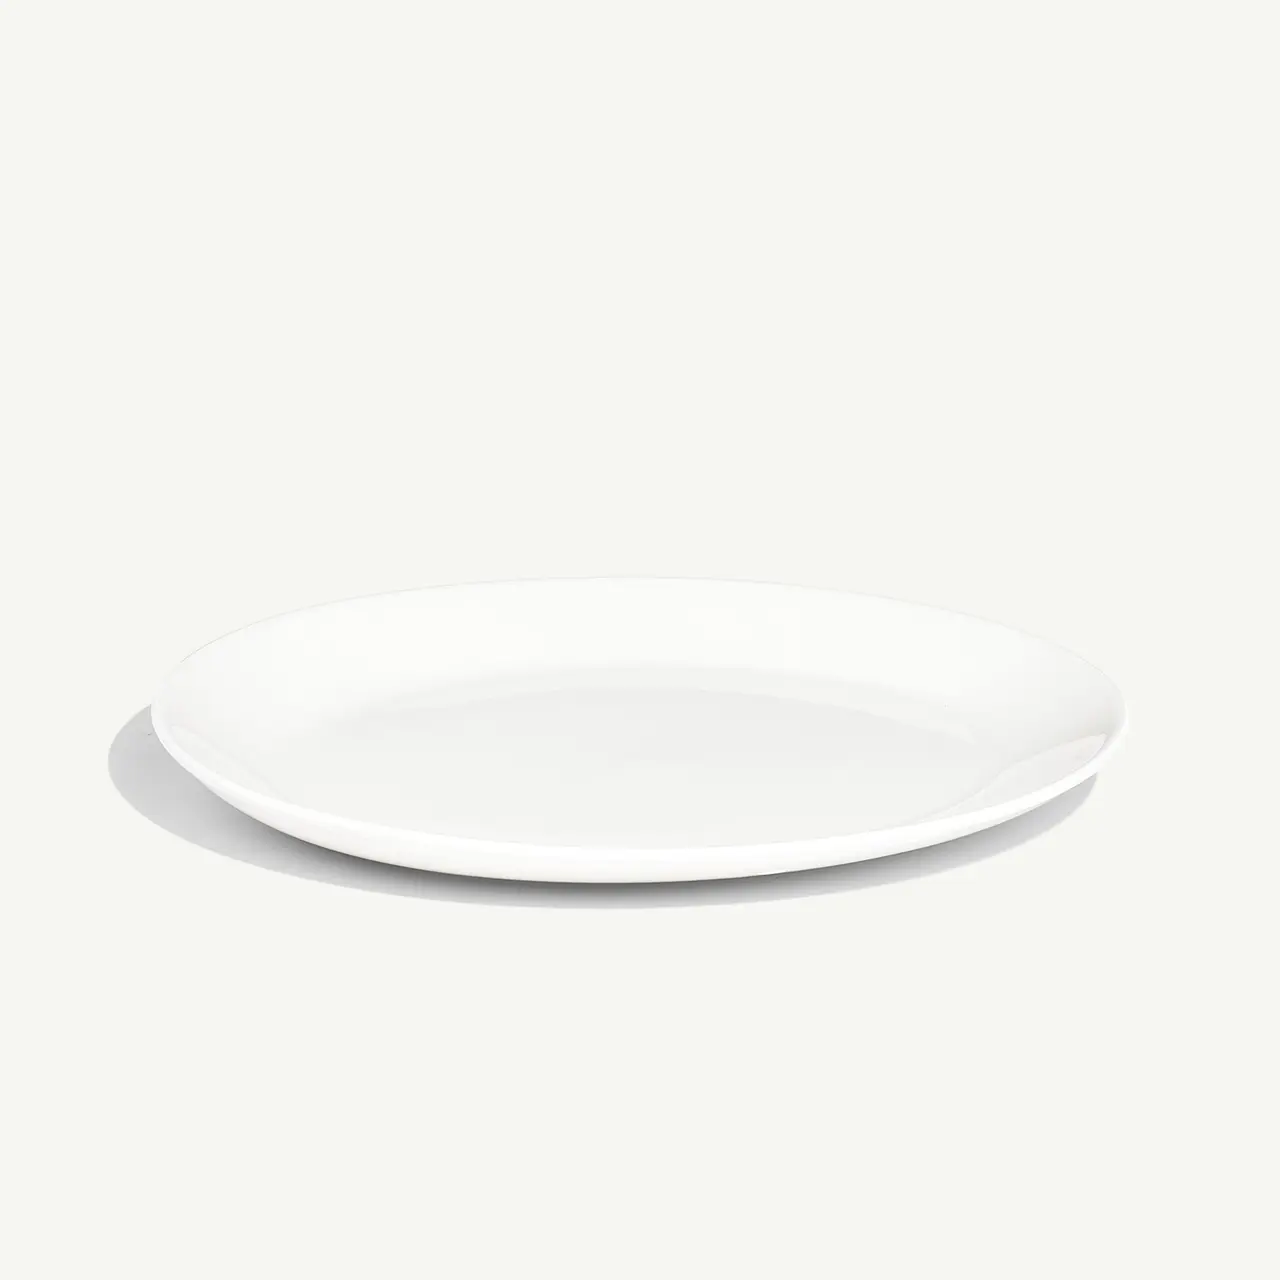 A simple white plate is placed against a light grey background.